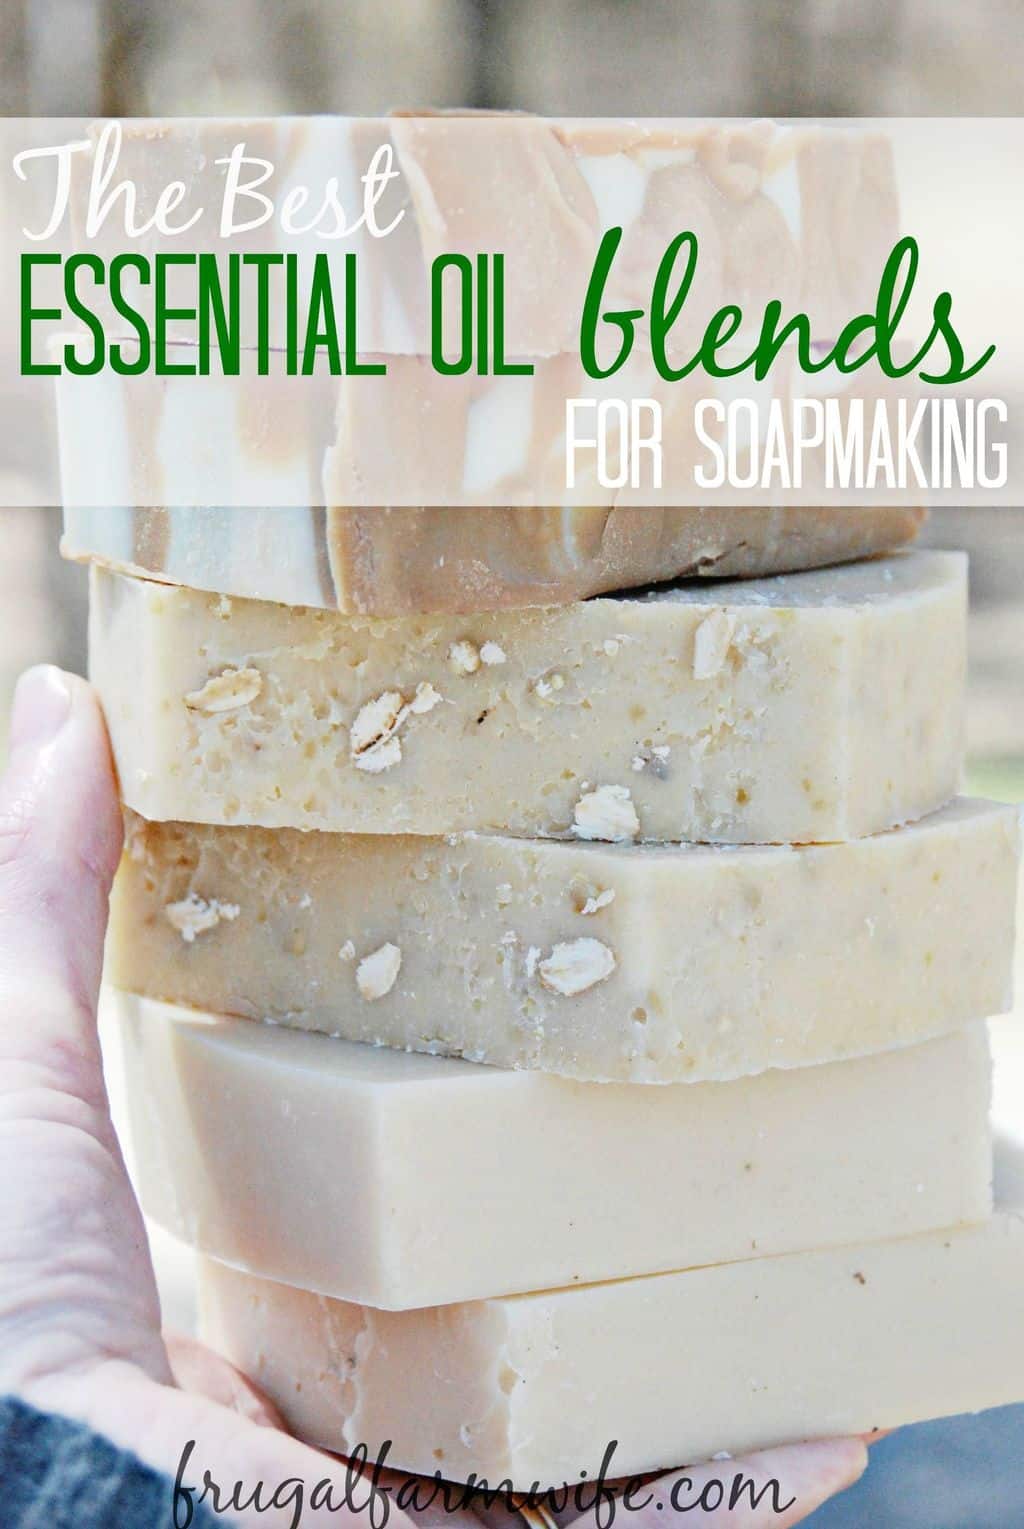 Image shows seven bars of homemade soap being held in a hand with text overlay that reads "The Best Essential Oil Blends for Soapmaking"